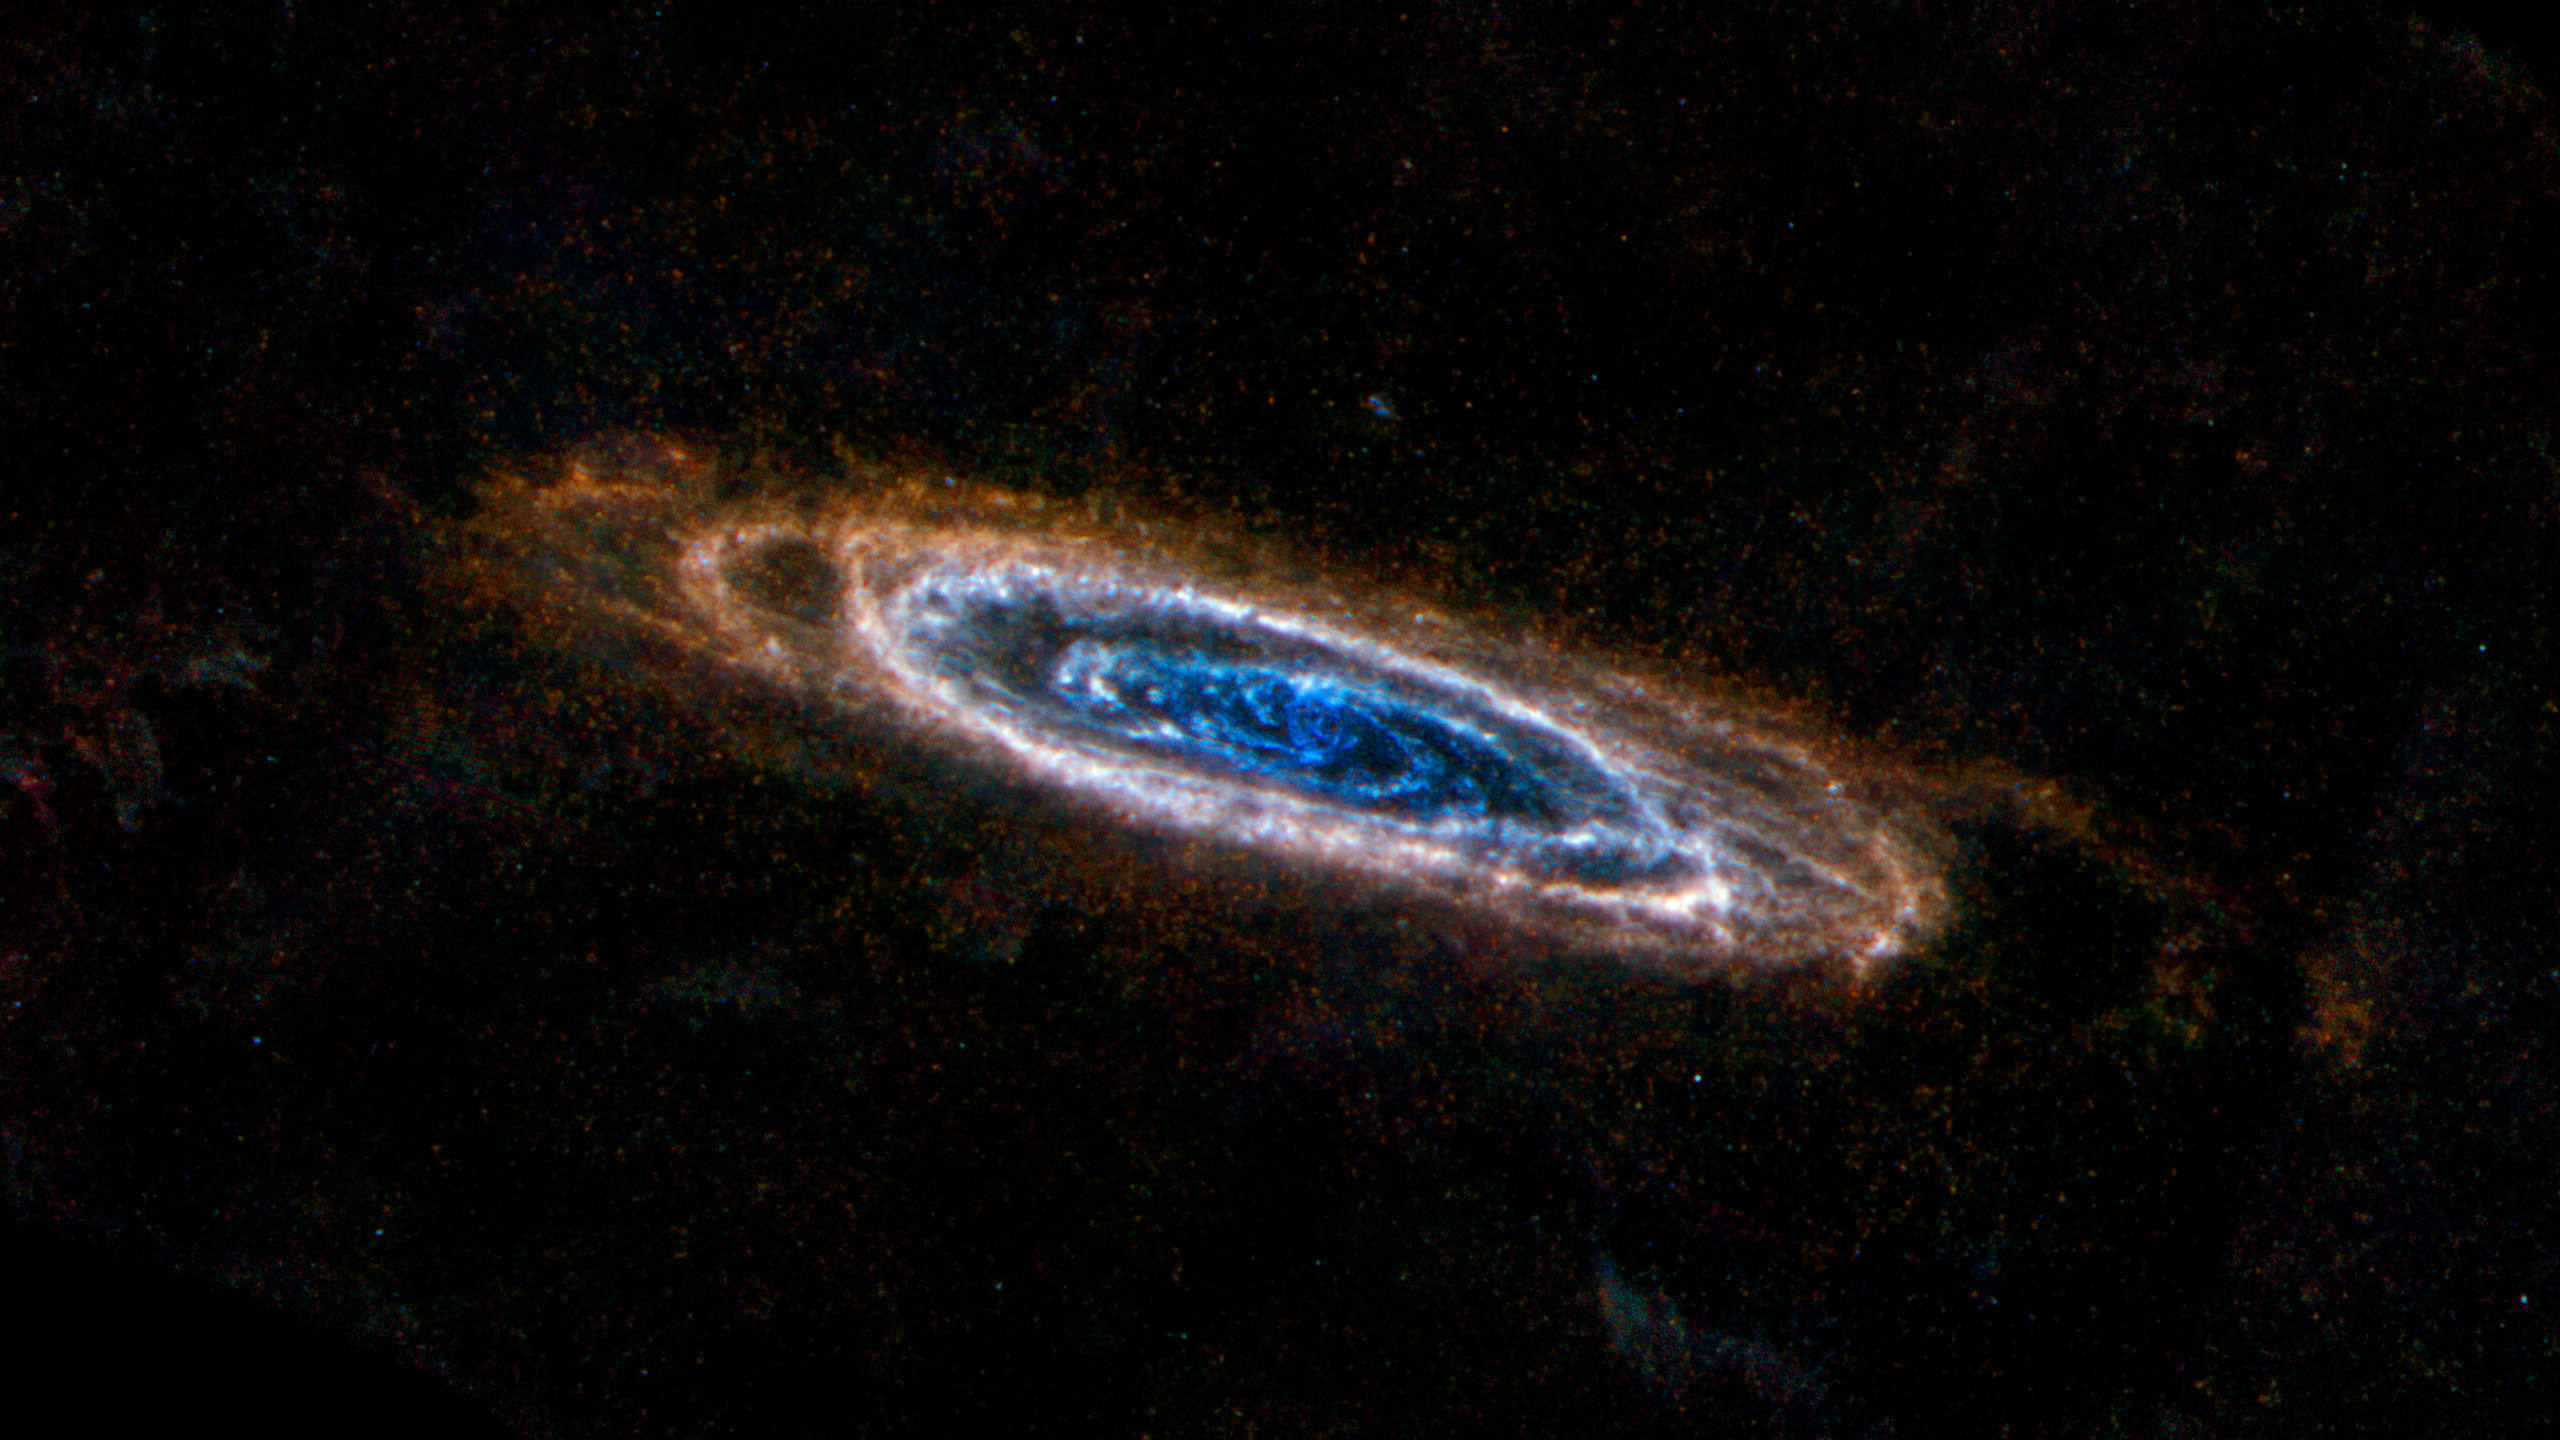 Using the Herschel Space Observatory, this image shows the swirls of dust surrounding the Andromeda galaxy in colorful detail. Image Credit: ESA/NASA/JPL-Caltech/NHSC.